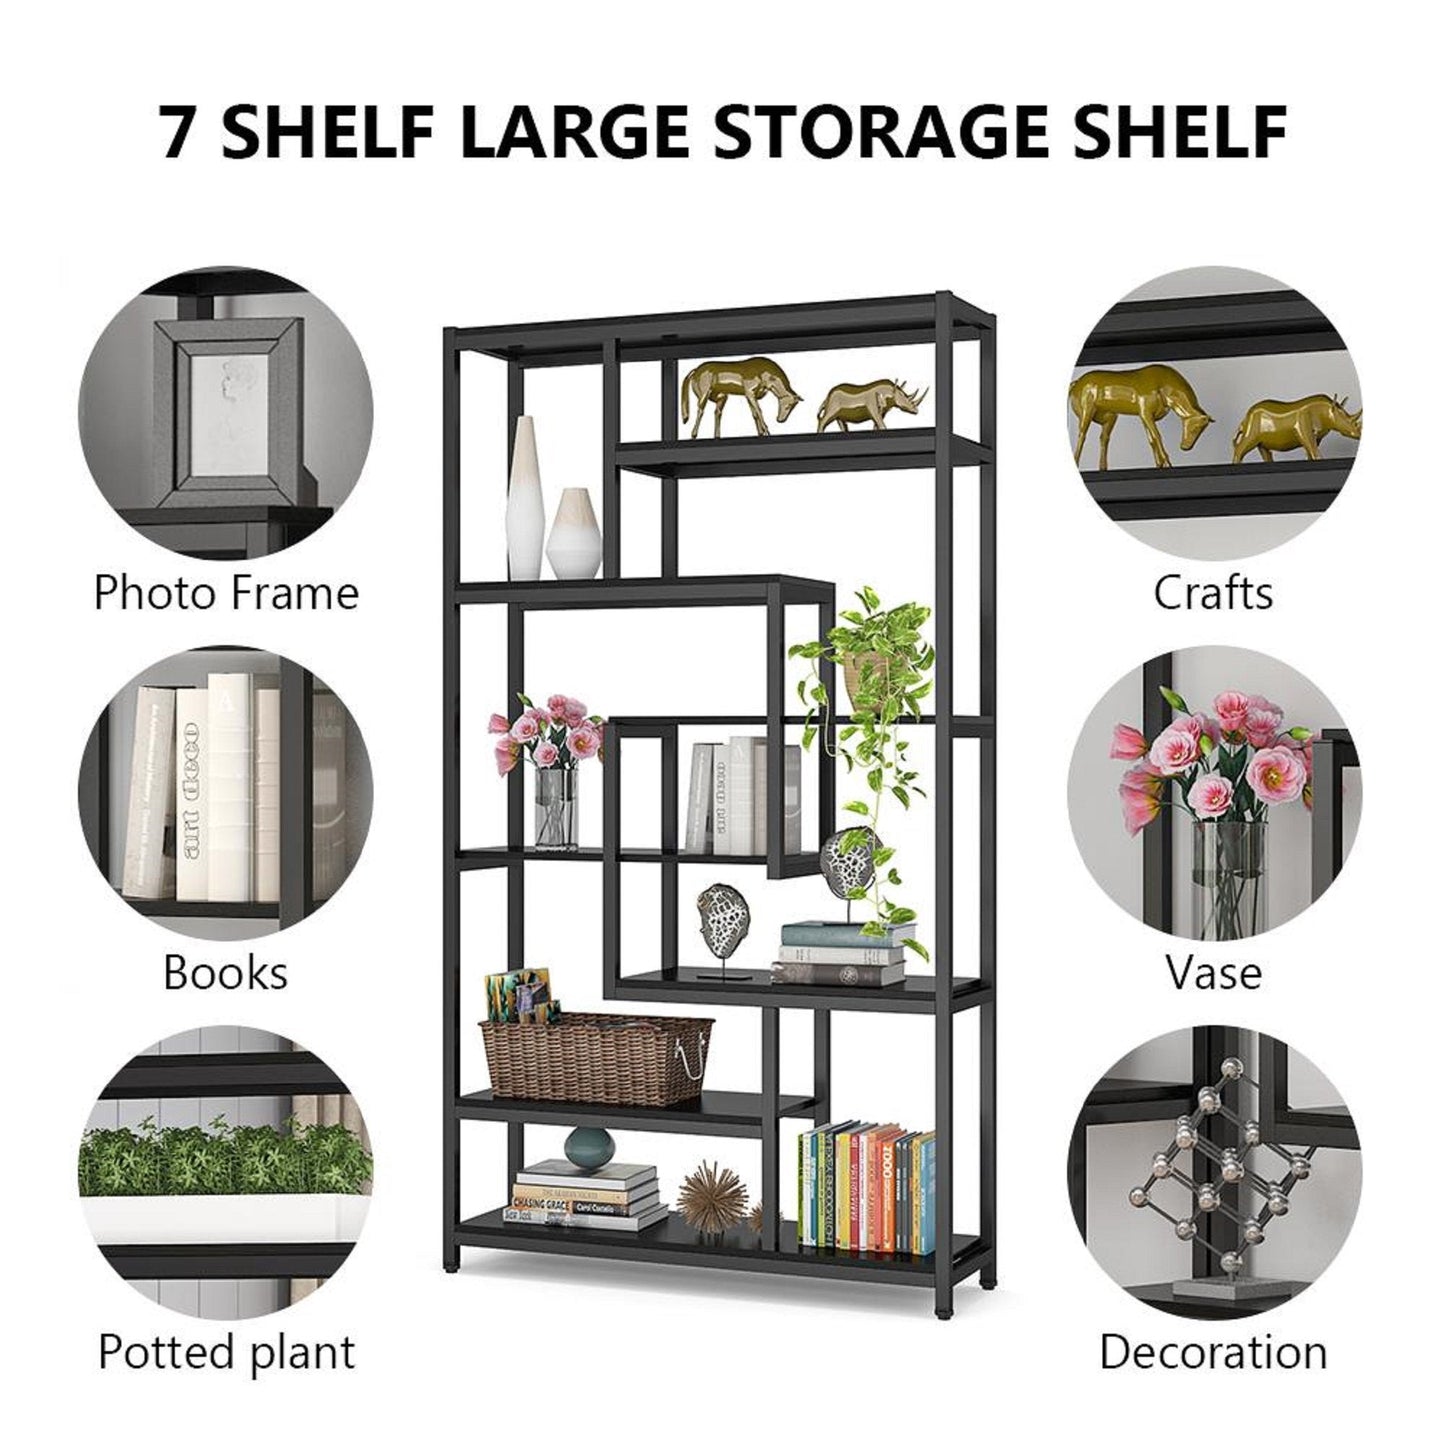 8-Shelves Staggered Bookshelf, Rustic Industrial Etagere Bookcase